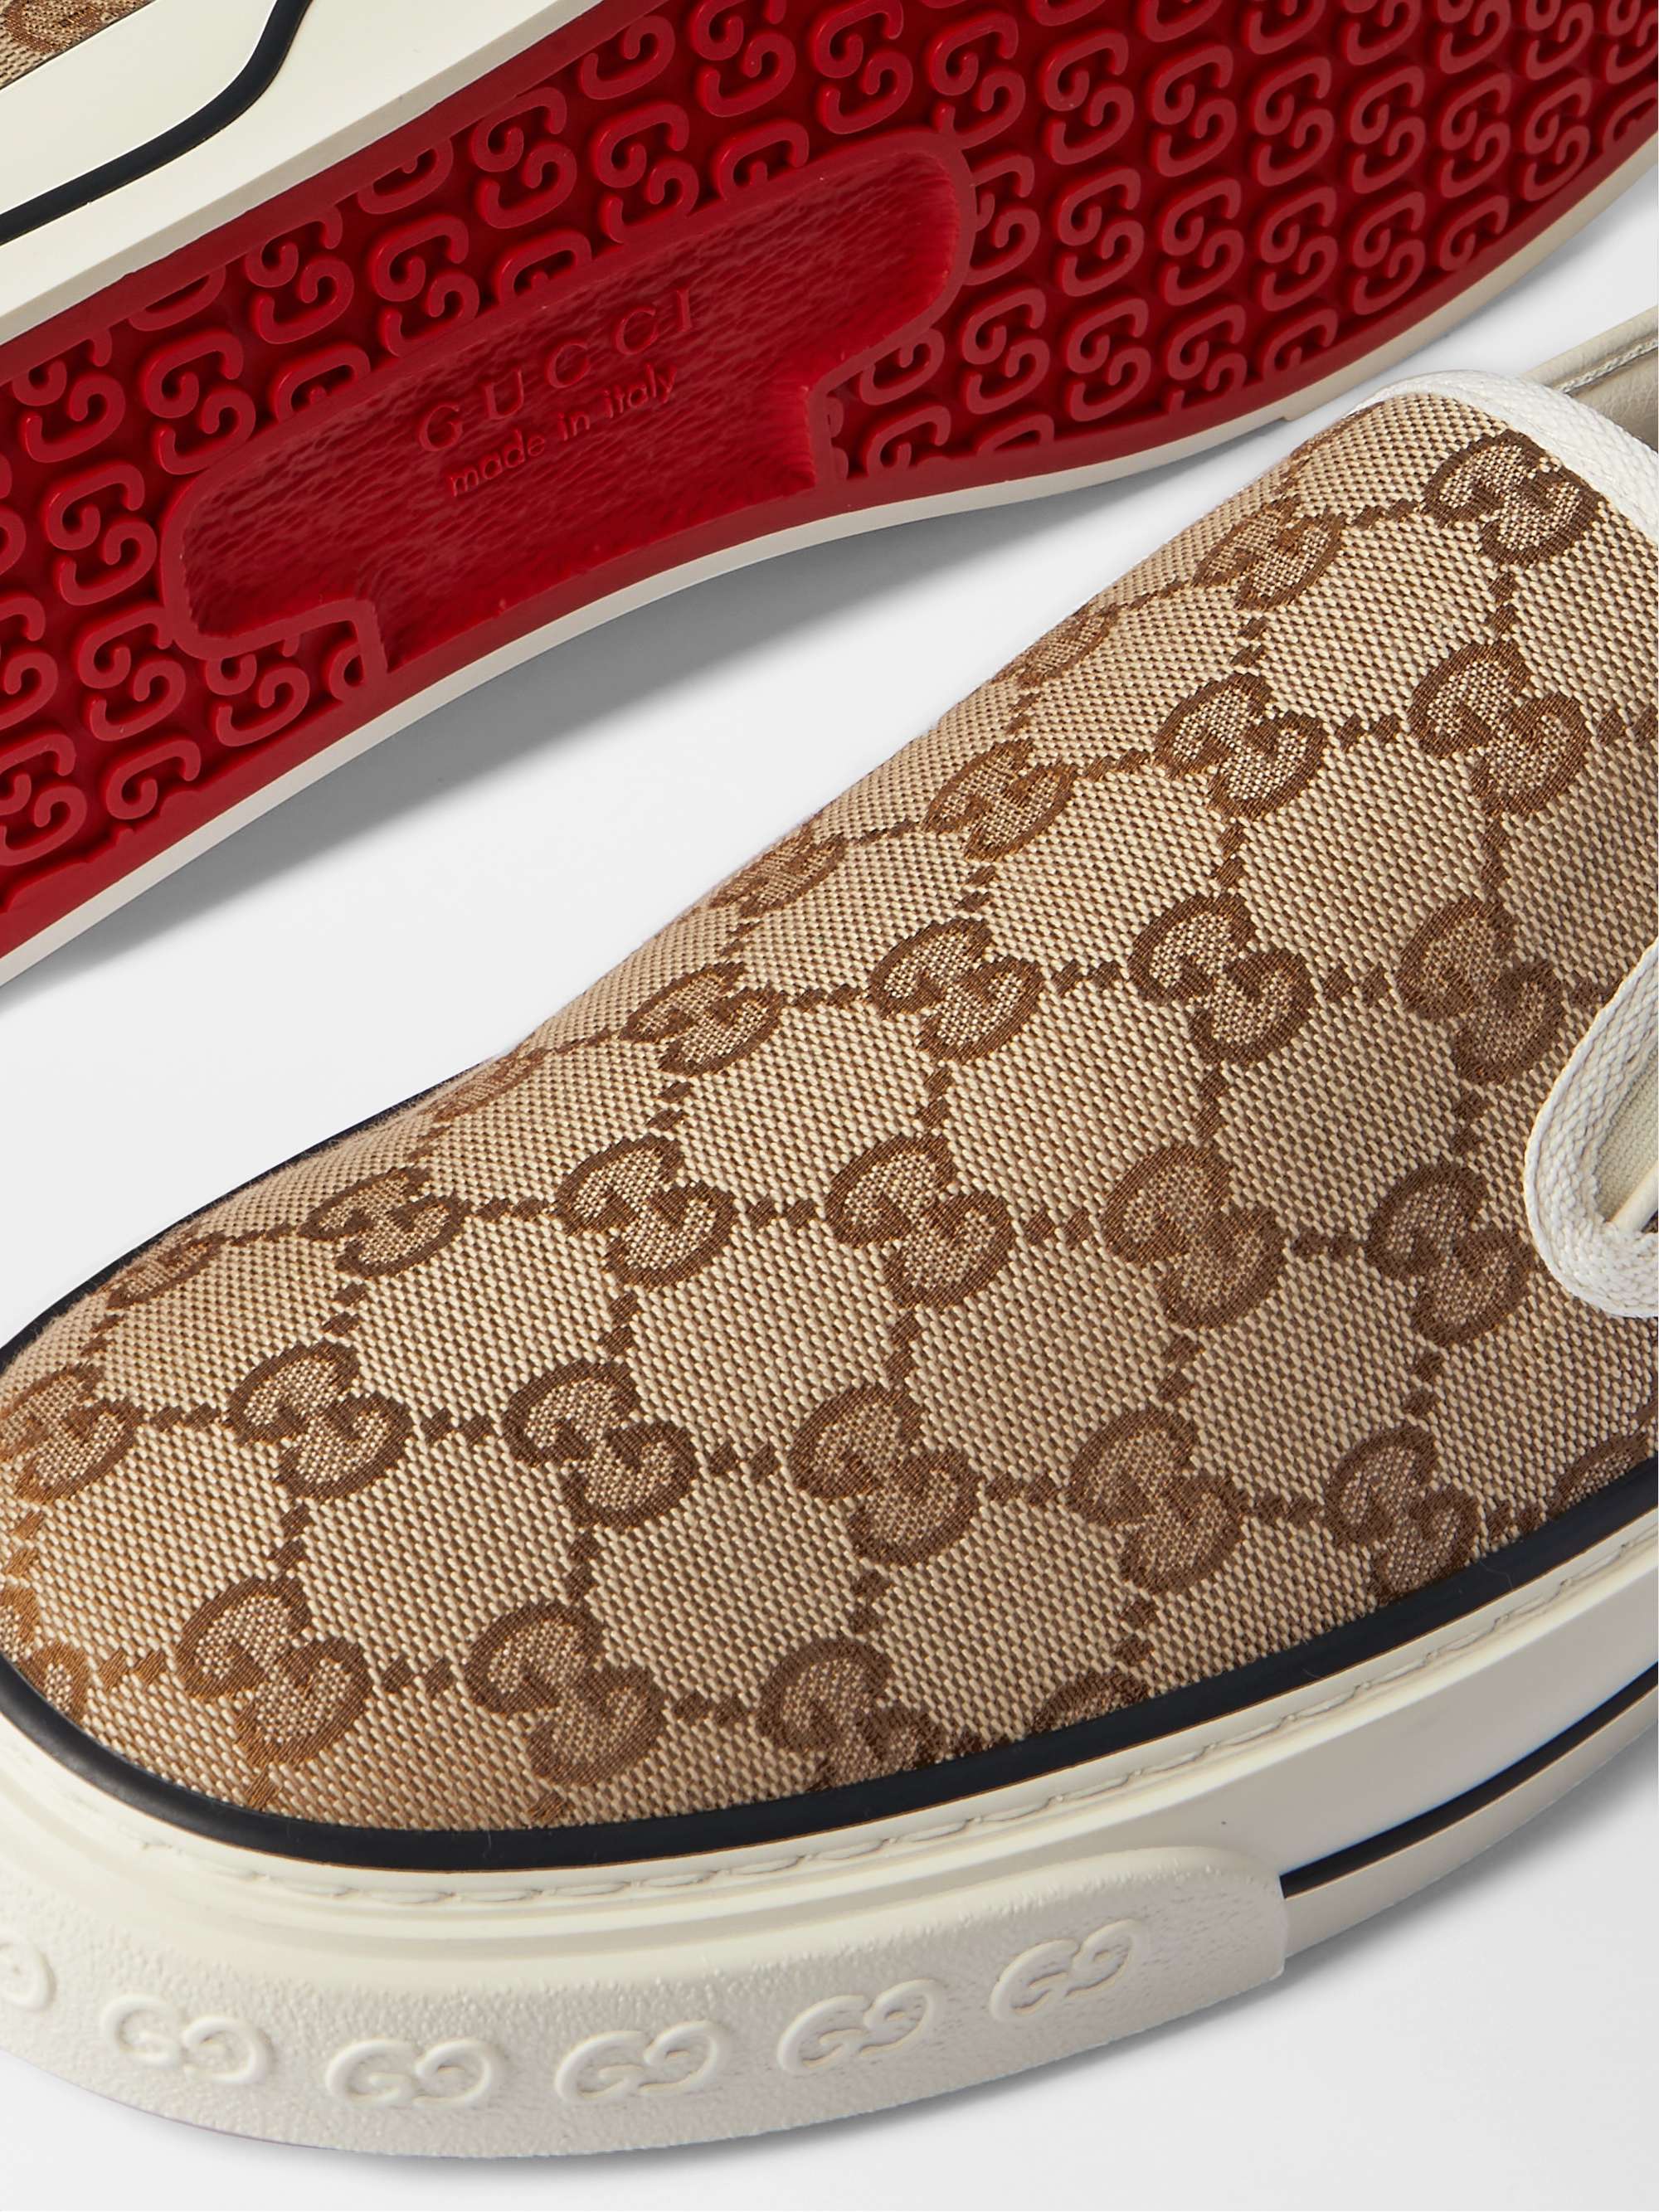 GUCCI Tennis 1977 Monogrammed Canvas Slip-On Sneakers | MR PORTER